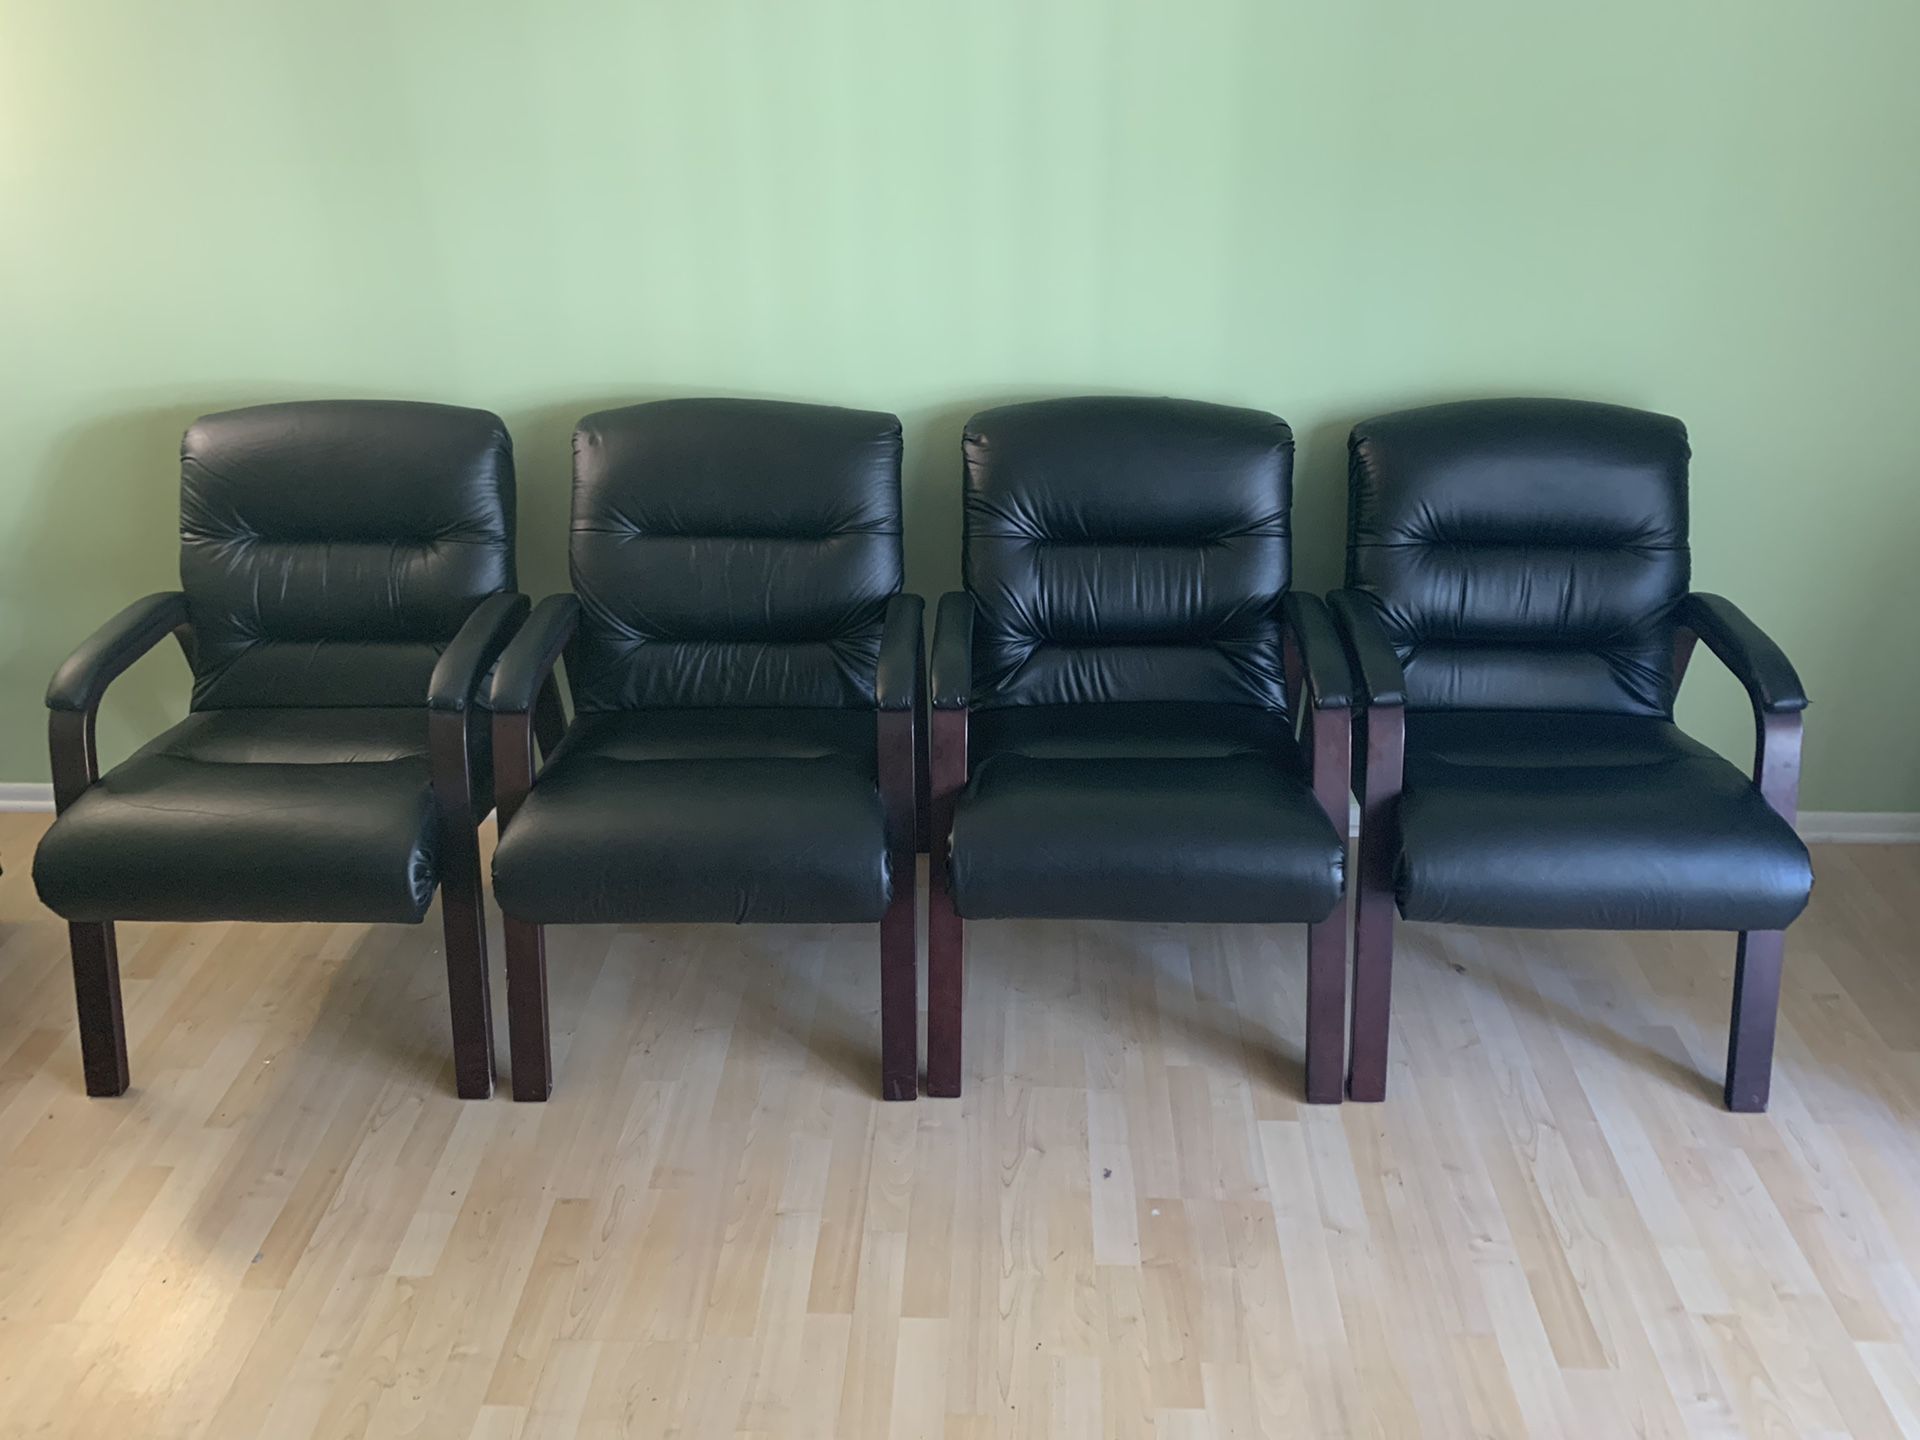 Set of 4 dining or living room chairs